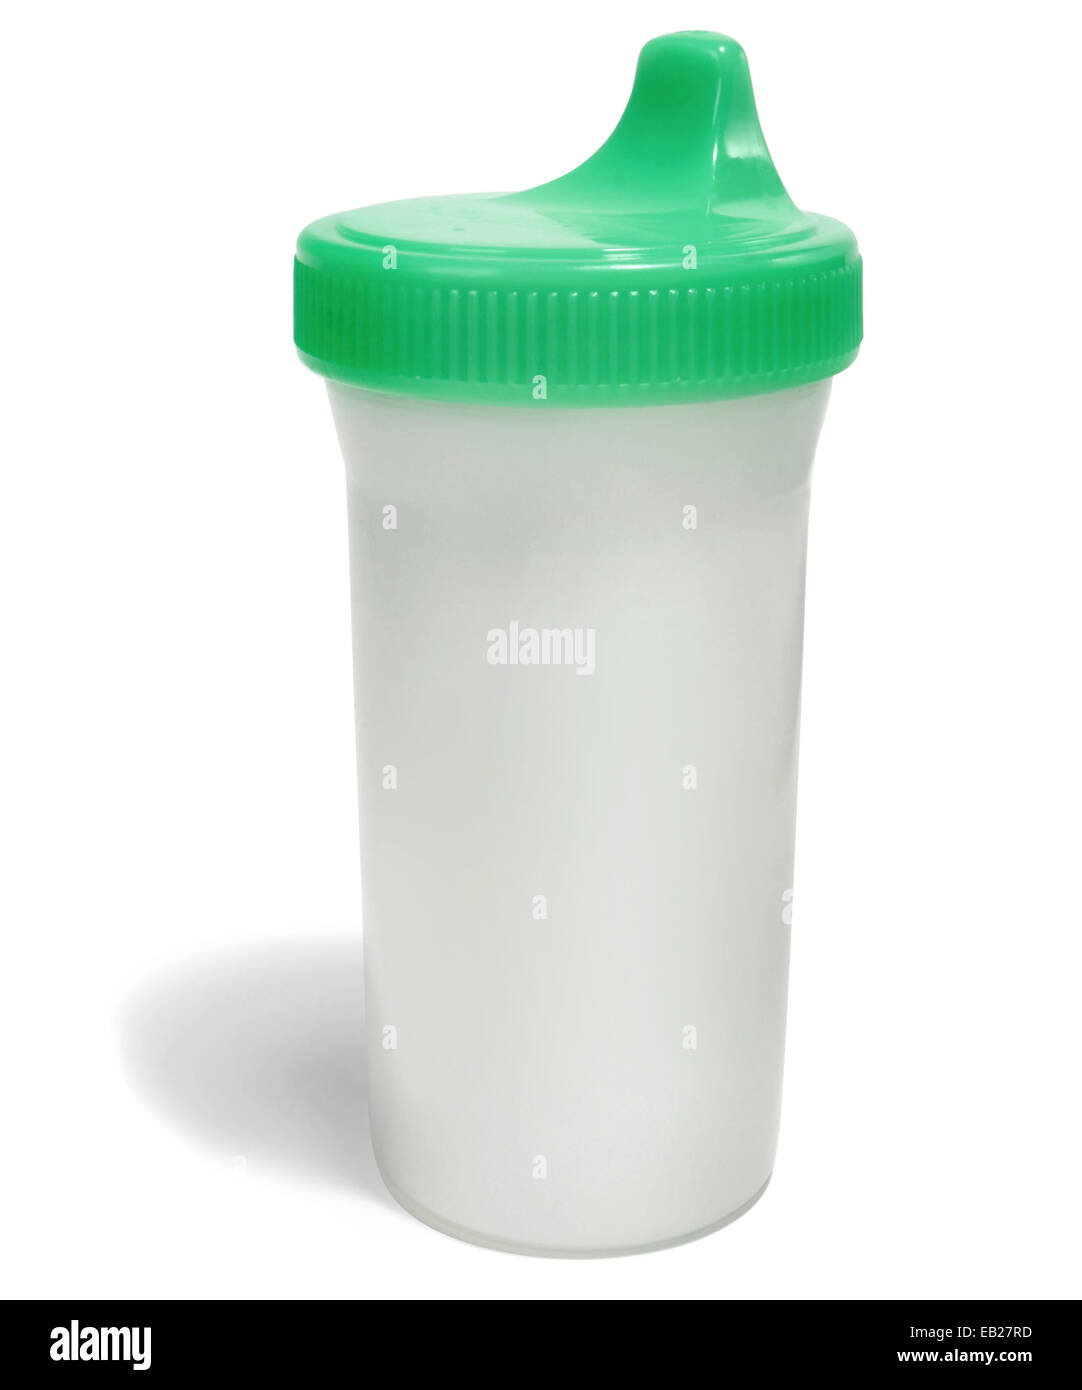 https://c8.alamy.com/comp/EB27RD/masters-sippy-cup-photographed-on-a-white-background-EB27RD.jpg